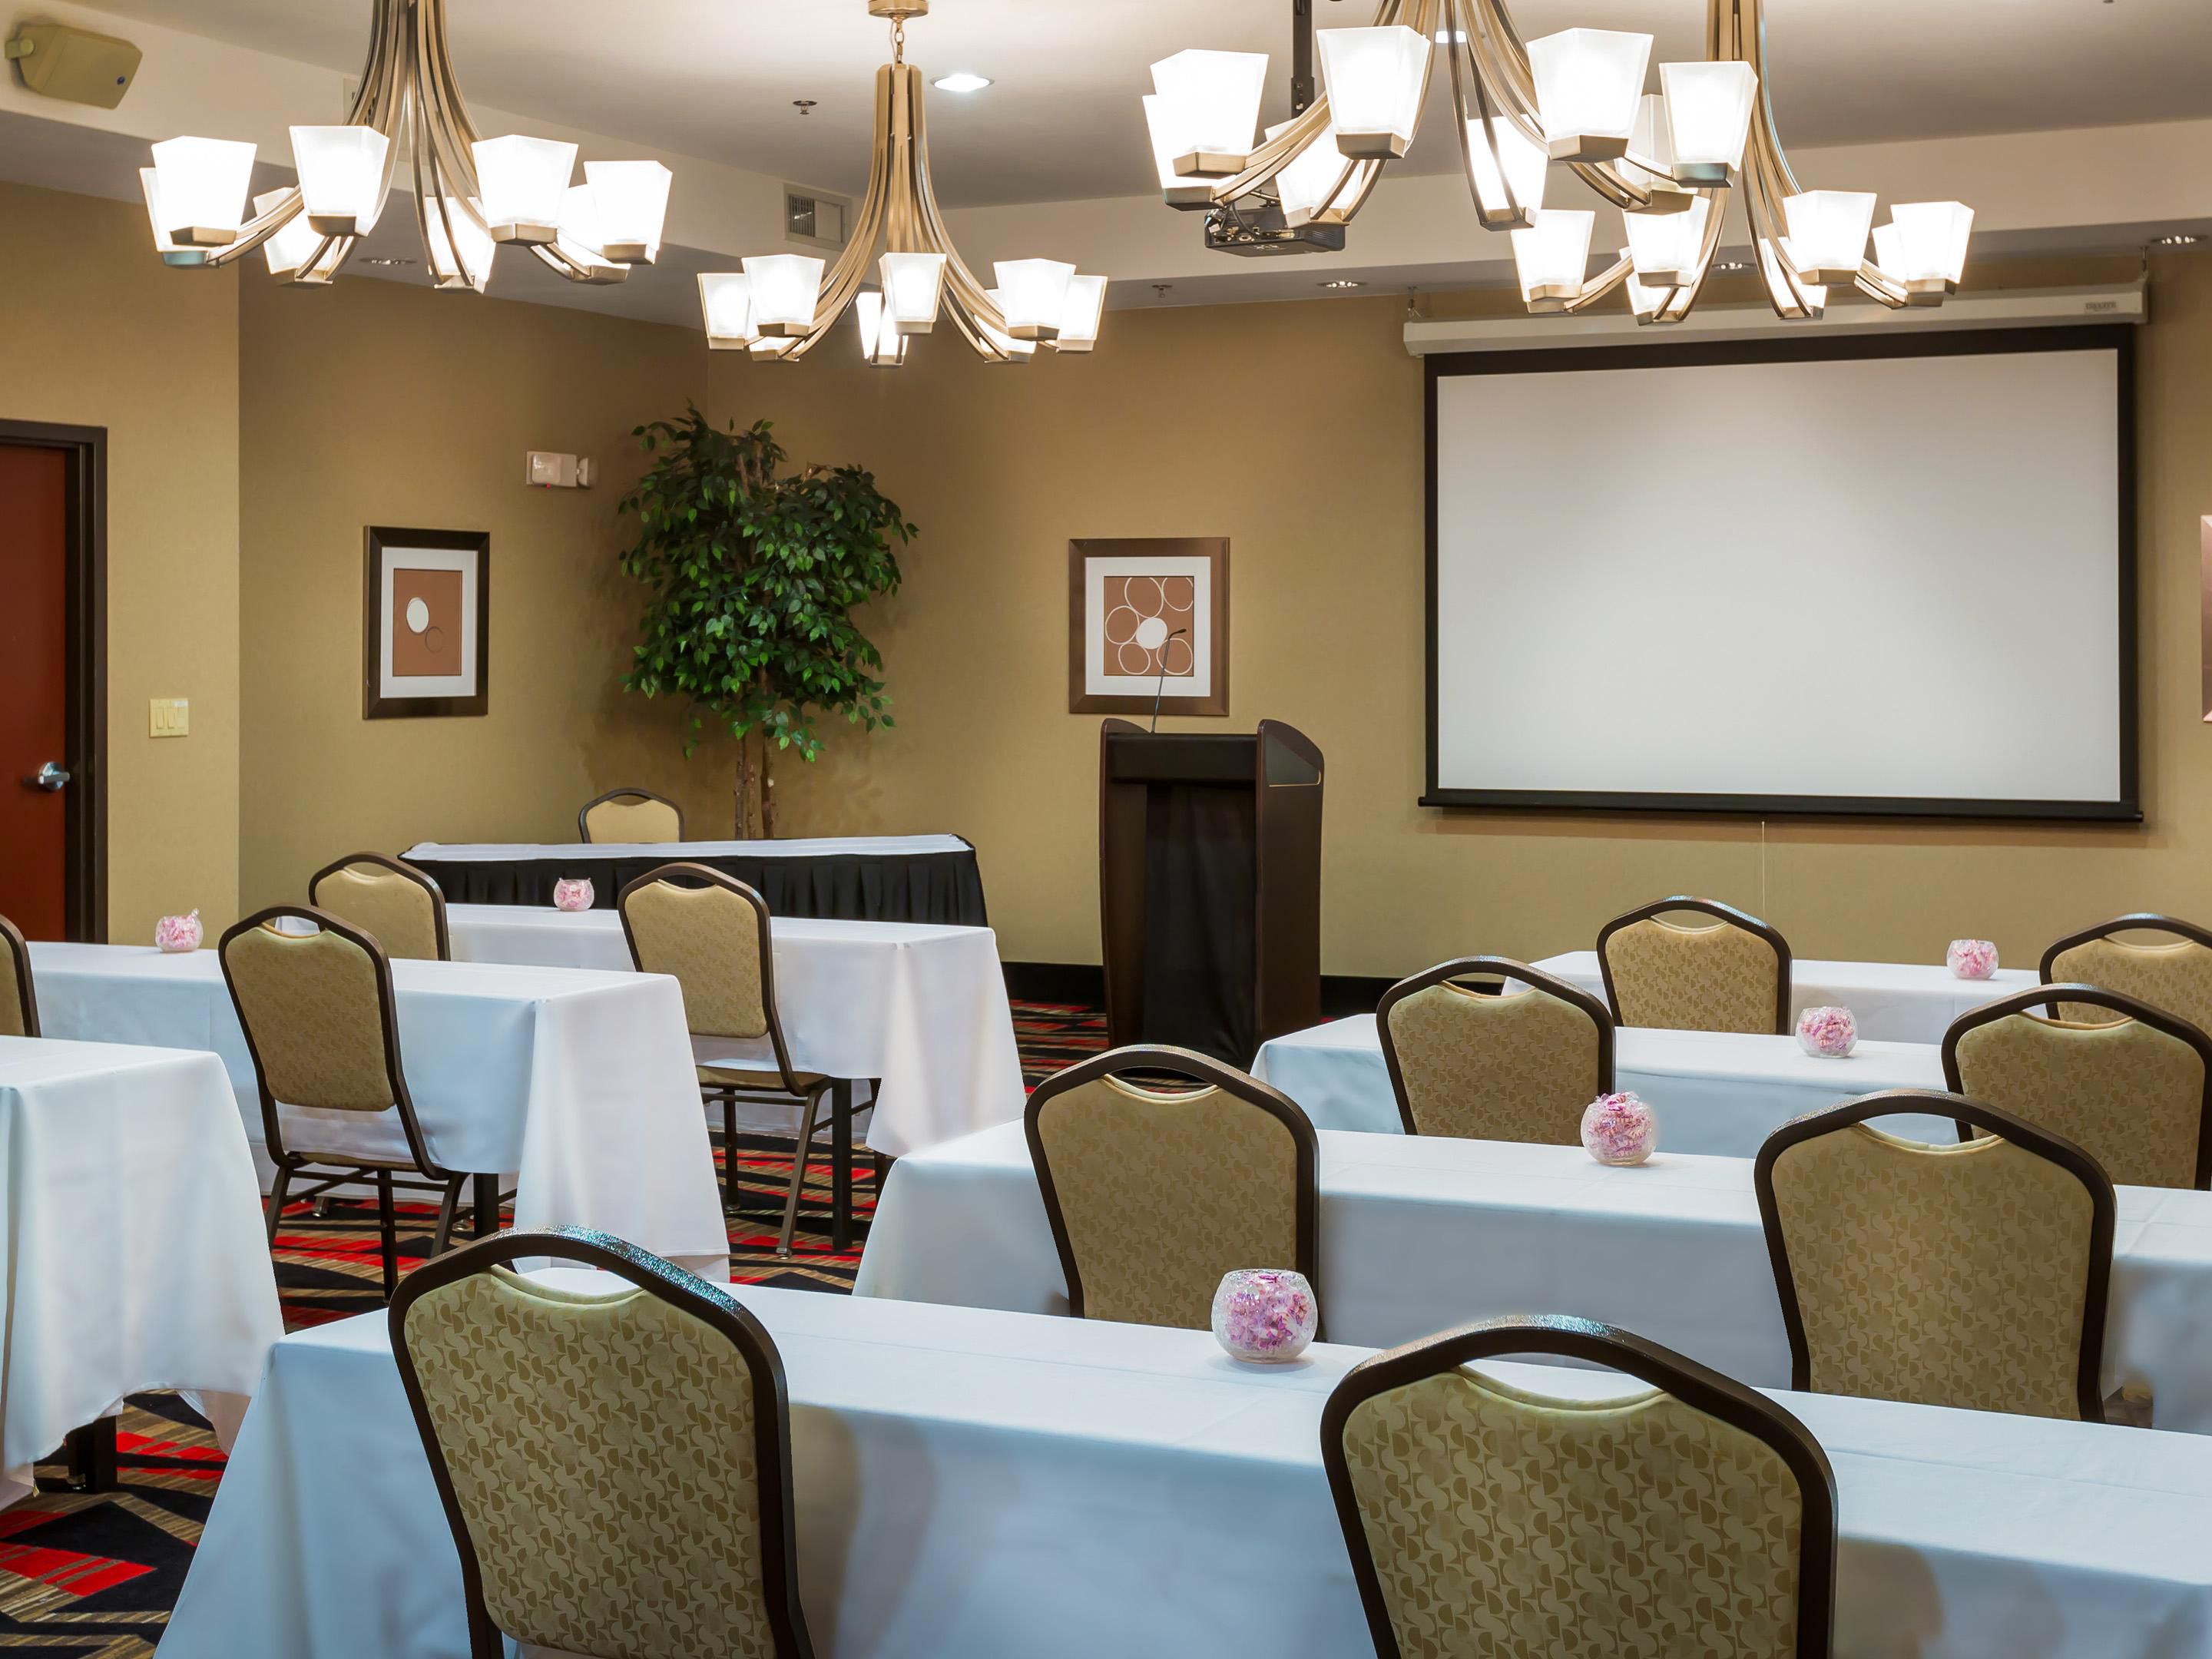 Our hotel offers plenty of space for any type of function for meetings, conferences, and special events. Our team is happy to help!